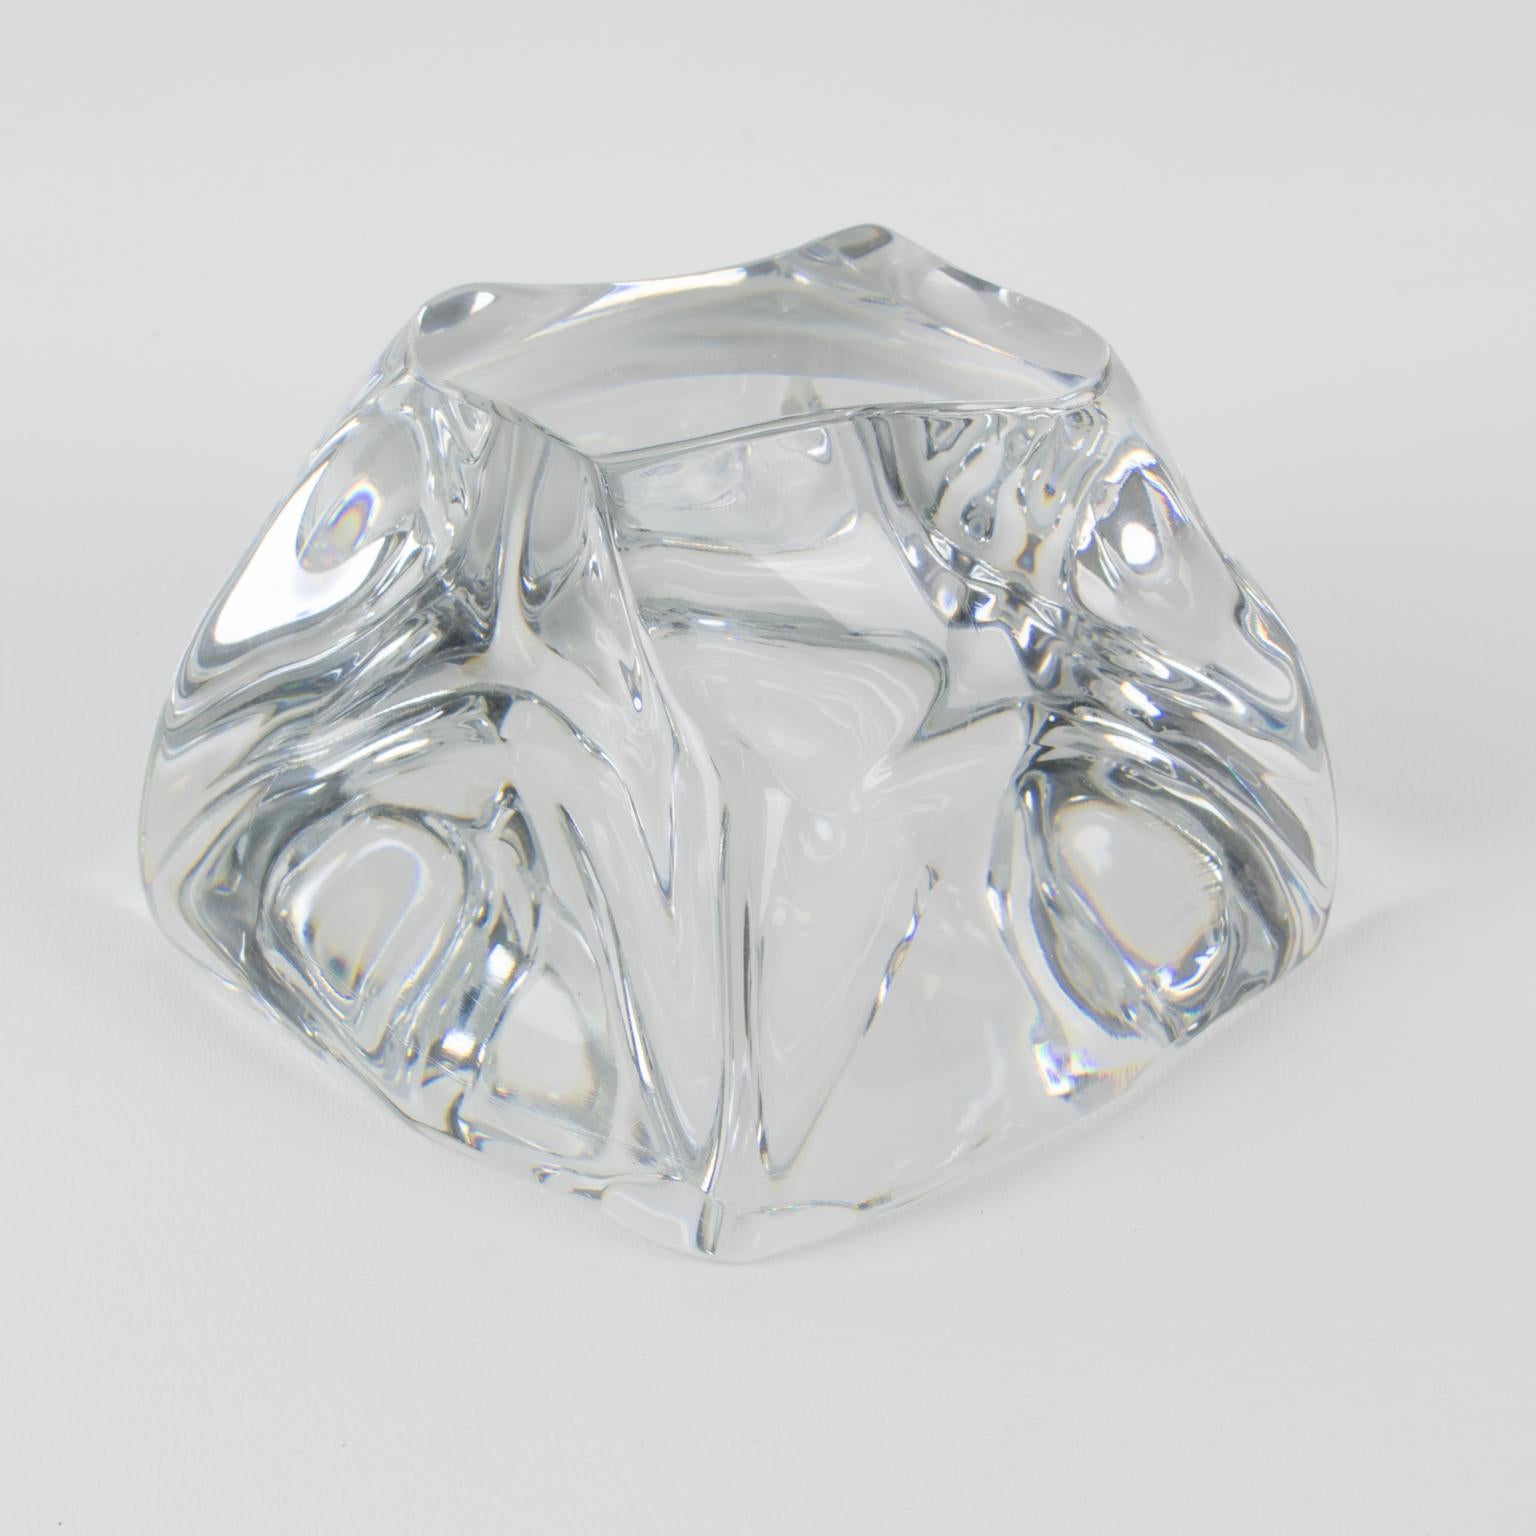 French Daum France Crystal Desktop Accessory Paperweight Sculpture For Sale